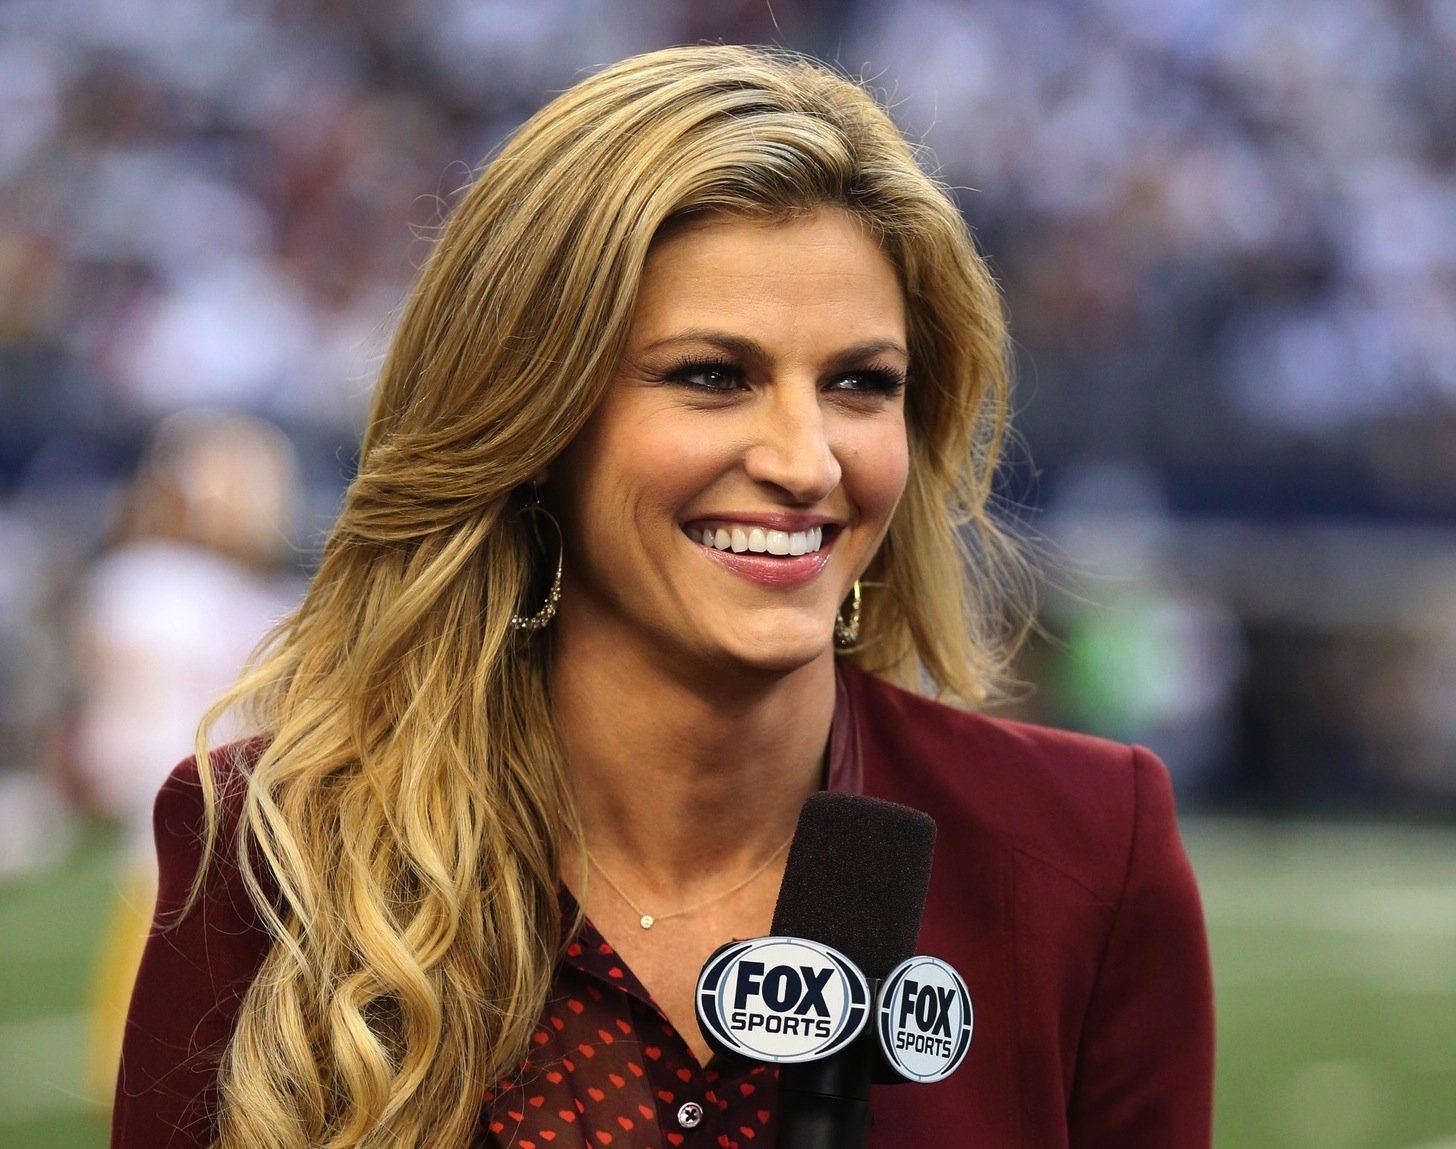 Naked pictures of erin andrews